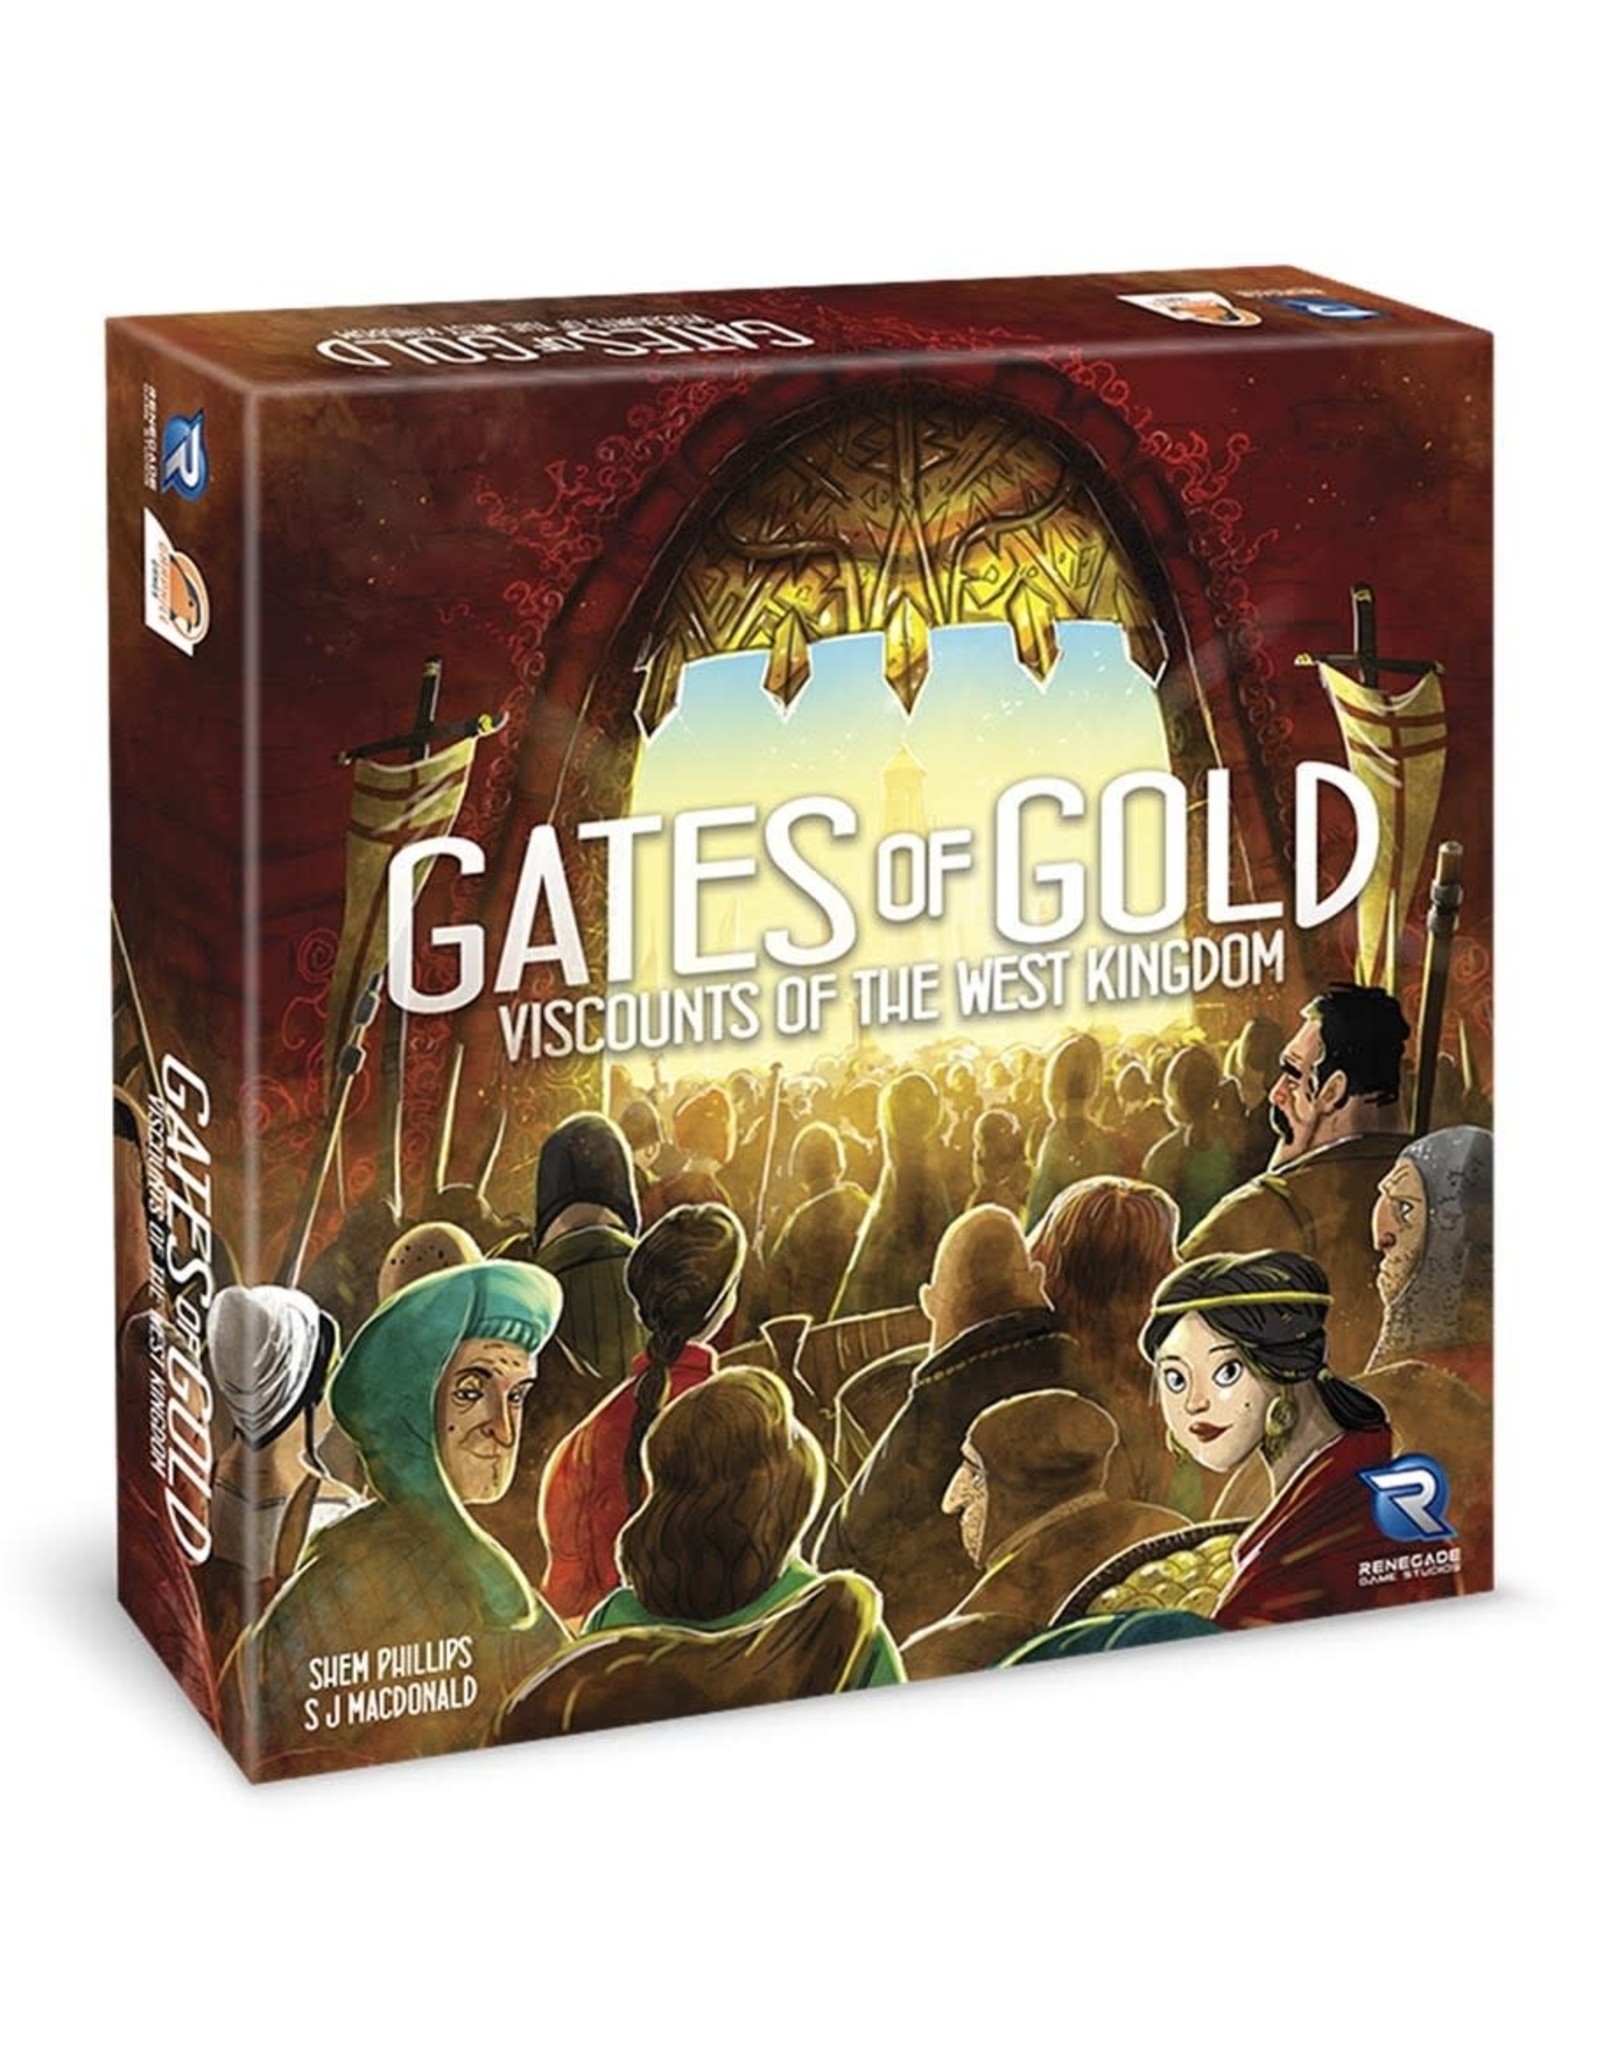 Renegade Viscounts of the West Kingdom: Gates of Gold